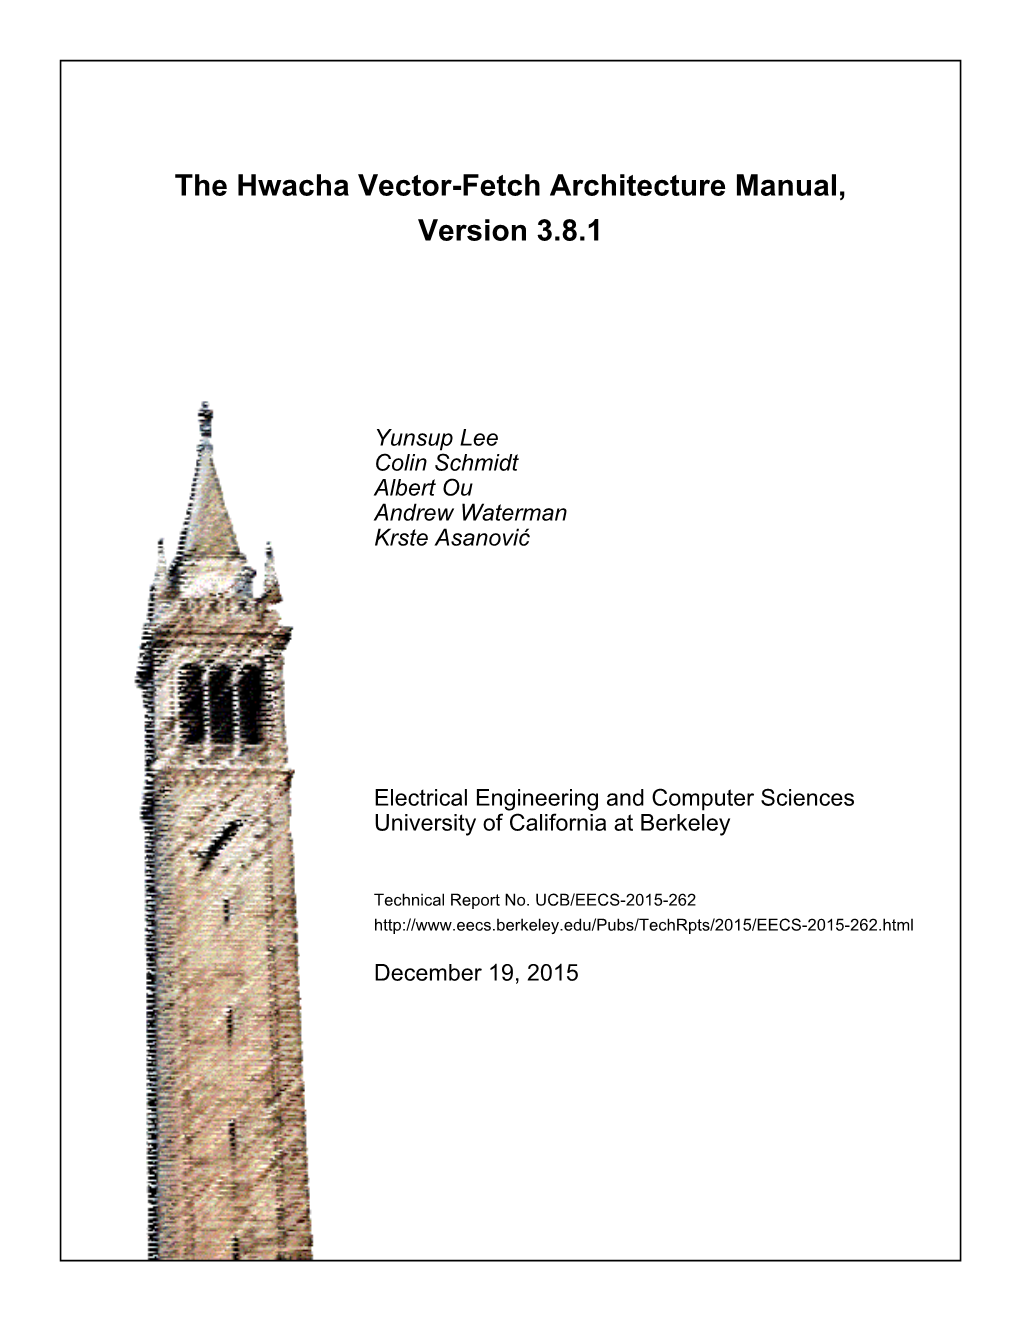 Hwacha Vector-Fetch Architecture Manual, Version 3.8.1